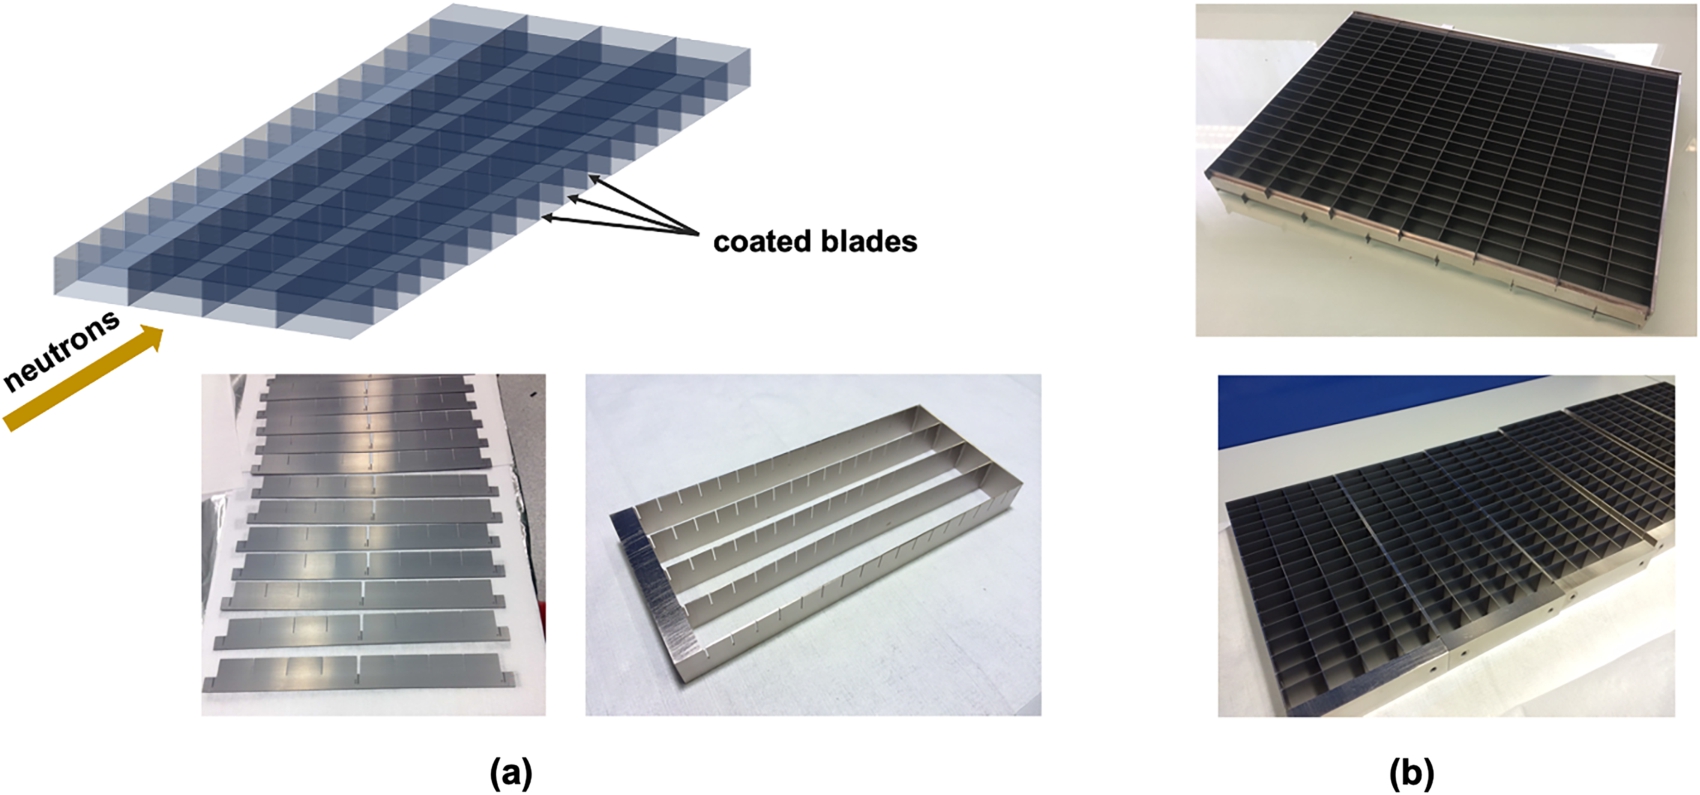 (a) Top: The design principle and building blocks of the Multi-Grid detector. The photographs show coated blades ready to be cut into two parts and inserted into the grid structure. (b) Examples of assembled grids with different numbers of voxels per grid and voxels of different sizes developed over the years for testing purposes. See text for details.